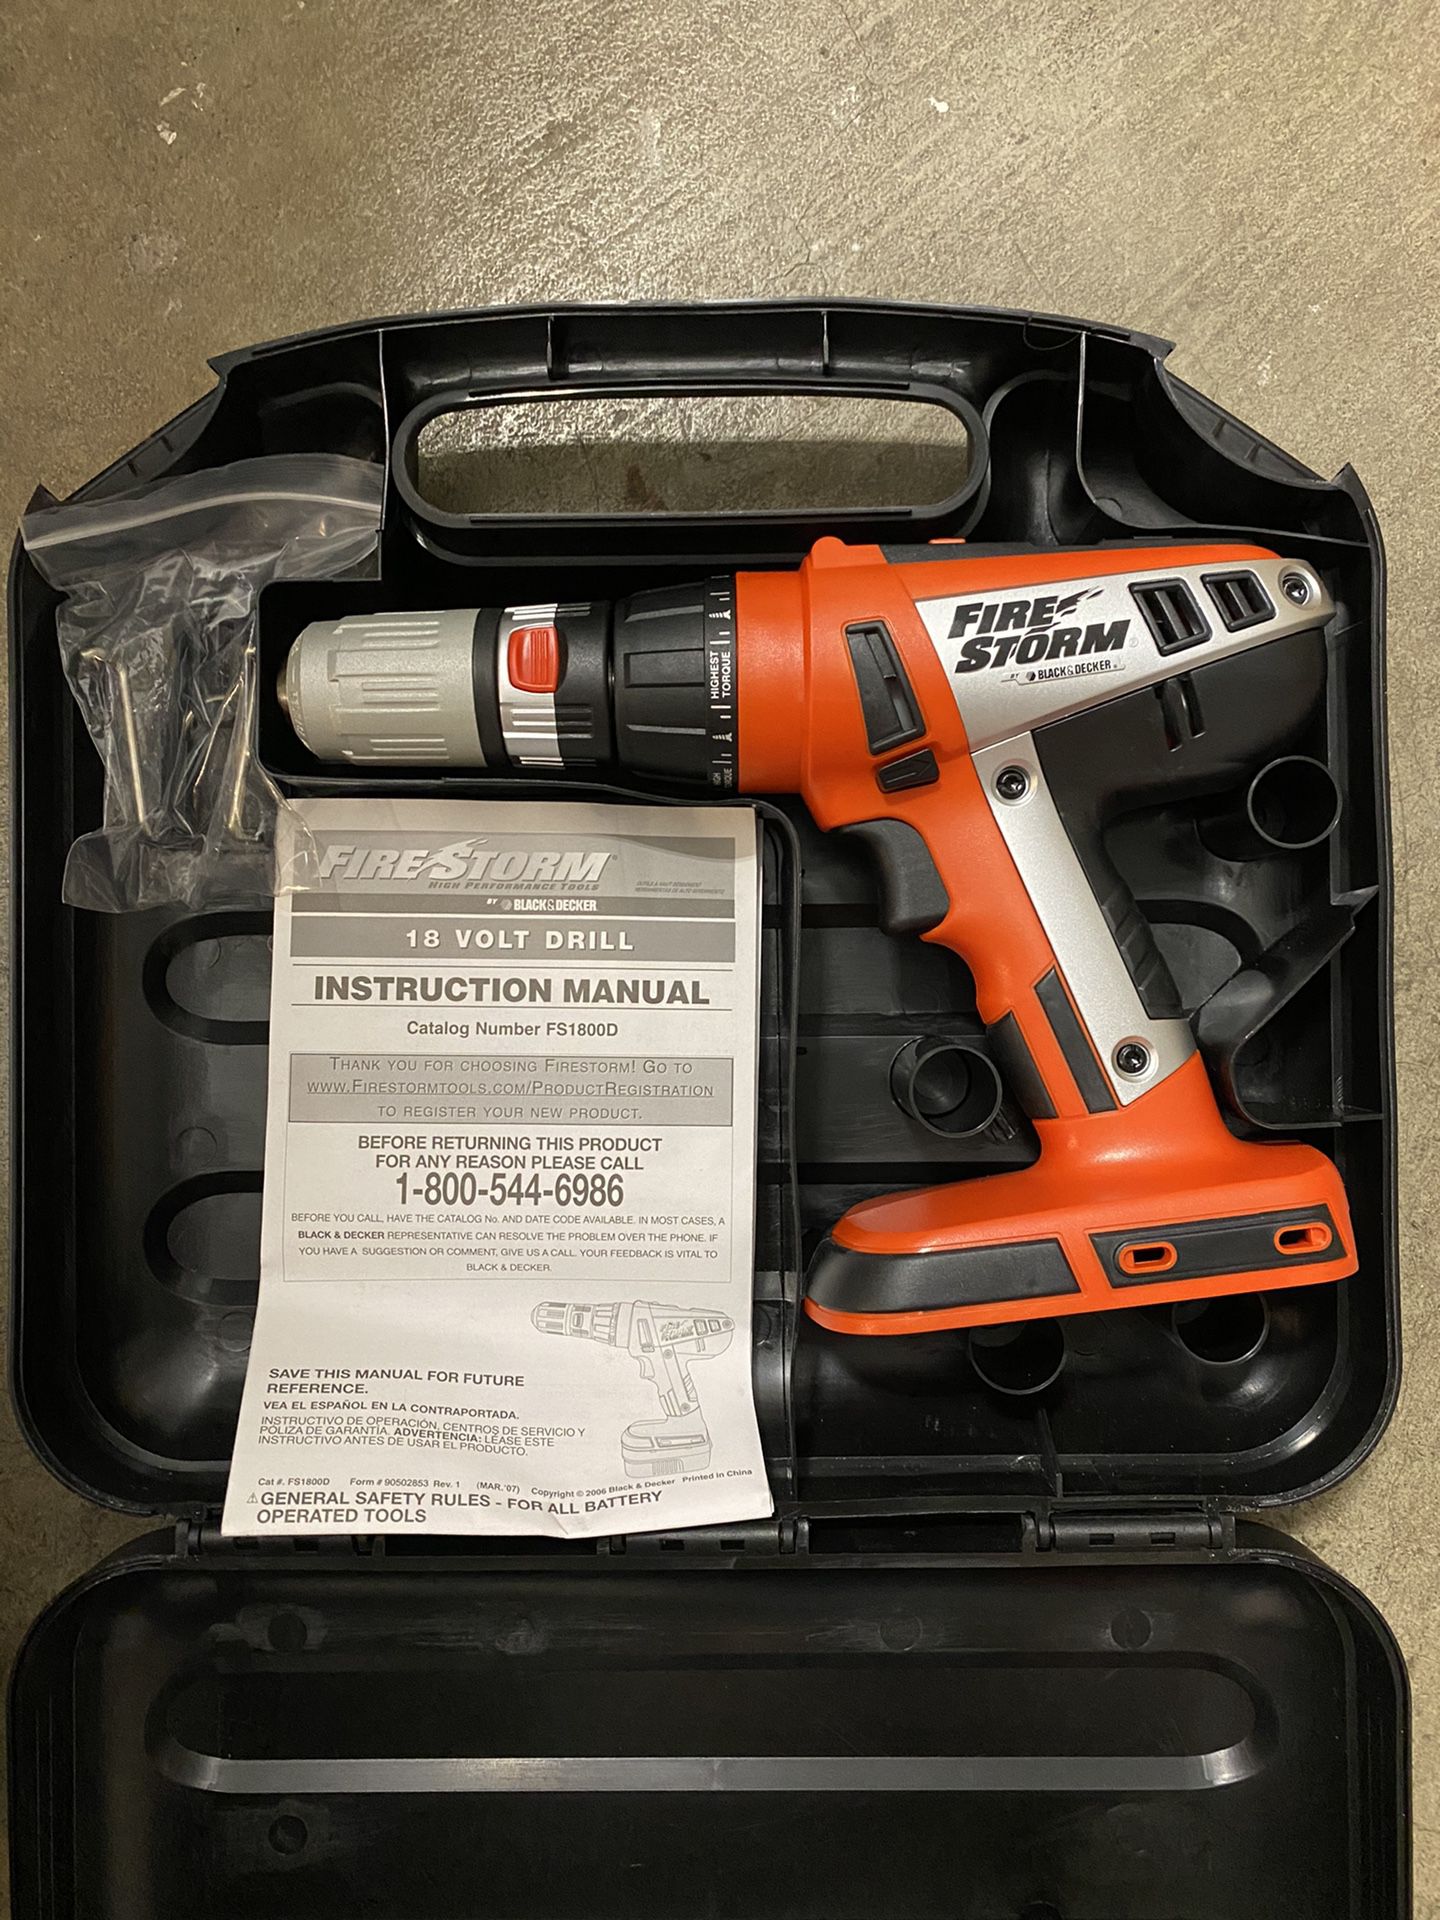 Black And Decker Firestorm Drill for Sale in Peninsula, OH - OfferUp